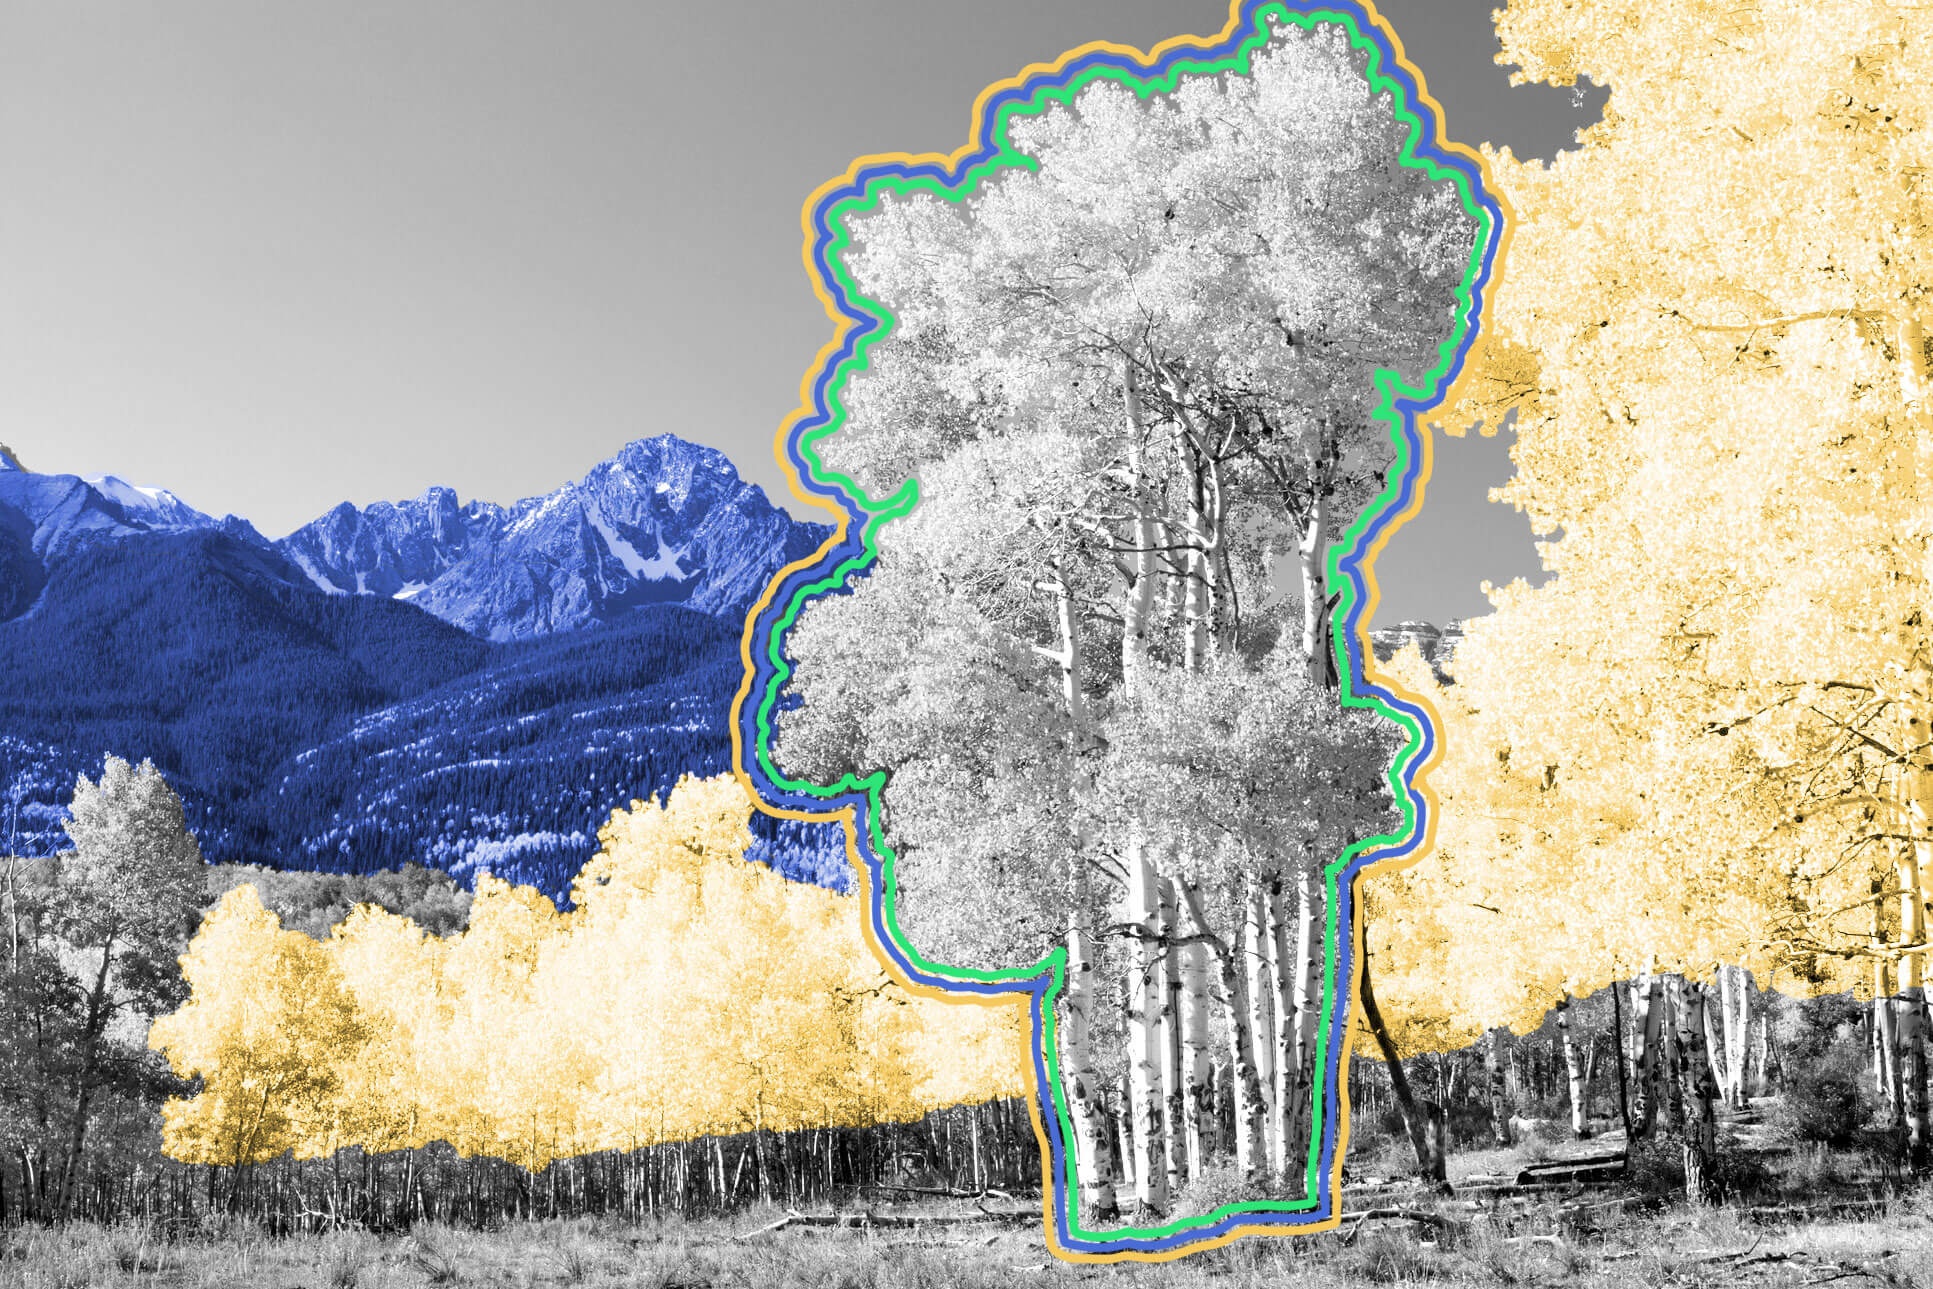 The world's most massive plant is a stand of 47,000 genetically identical aspen trees.